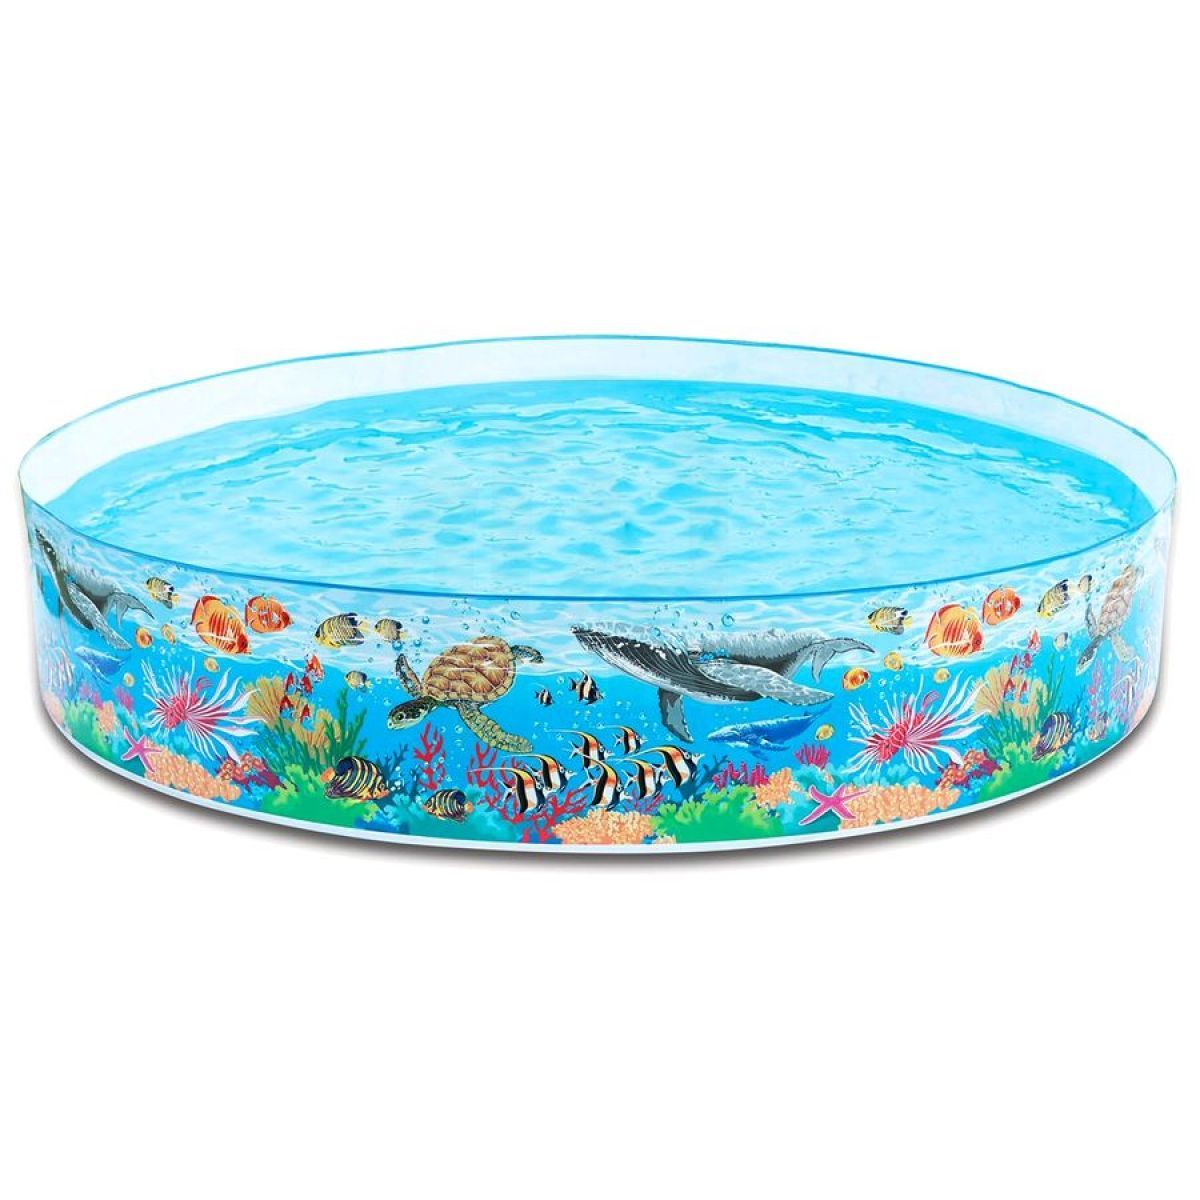 INTEX Oral Reef Snapset Paddling Pool For Children 